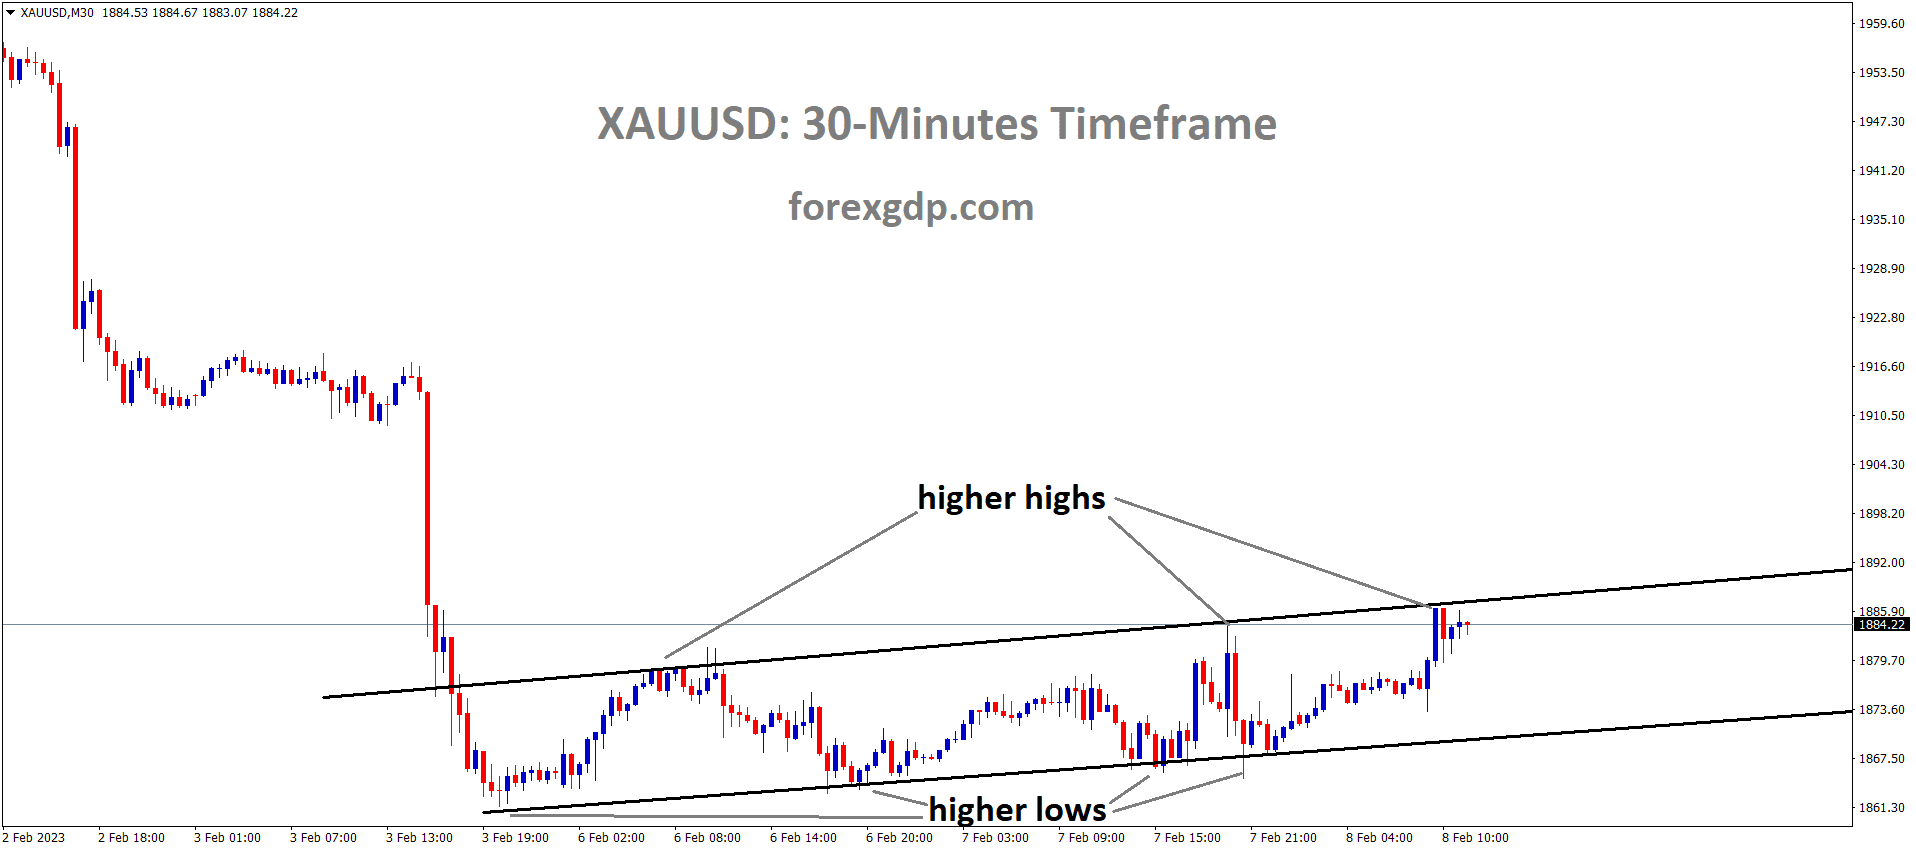 XAUUSD Gold Price is moving in an Ascending channel and the market has reached the higher high area of the channel